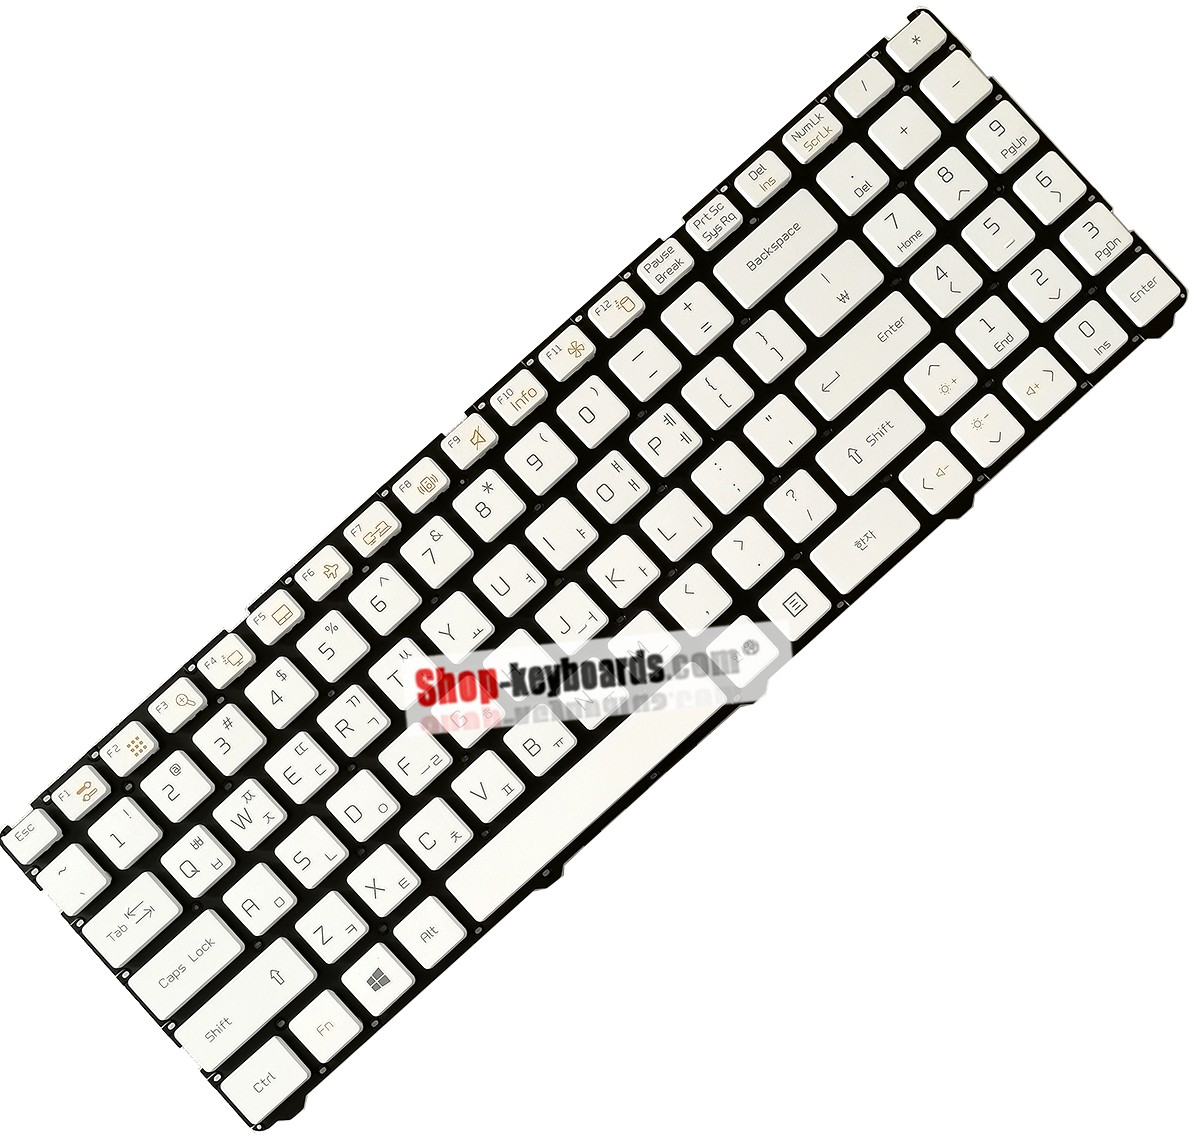 LG 15UD470 Keyboard replacement